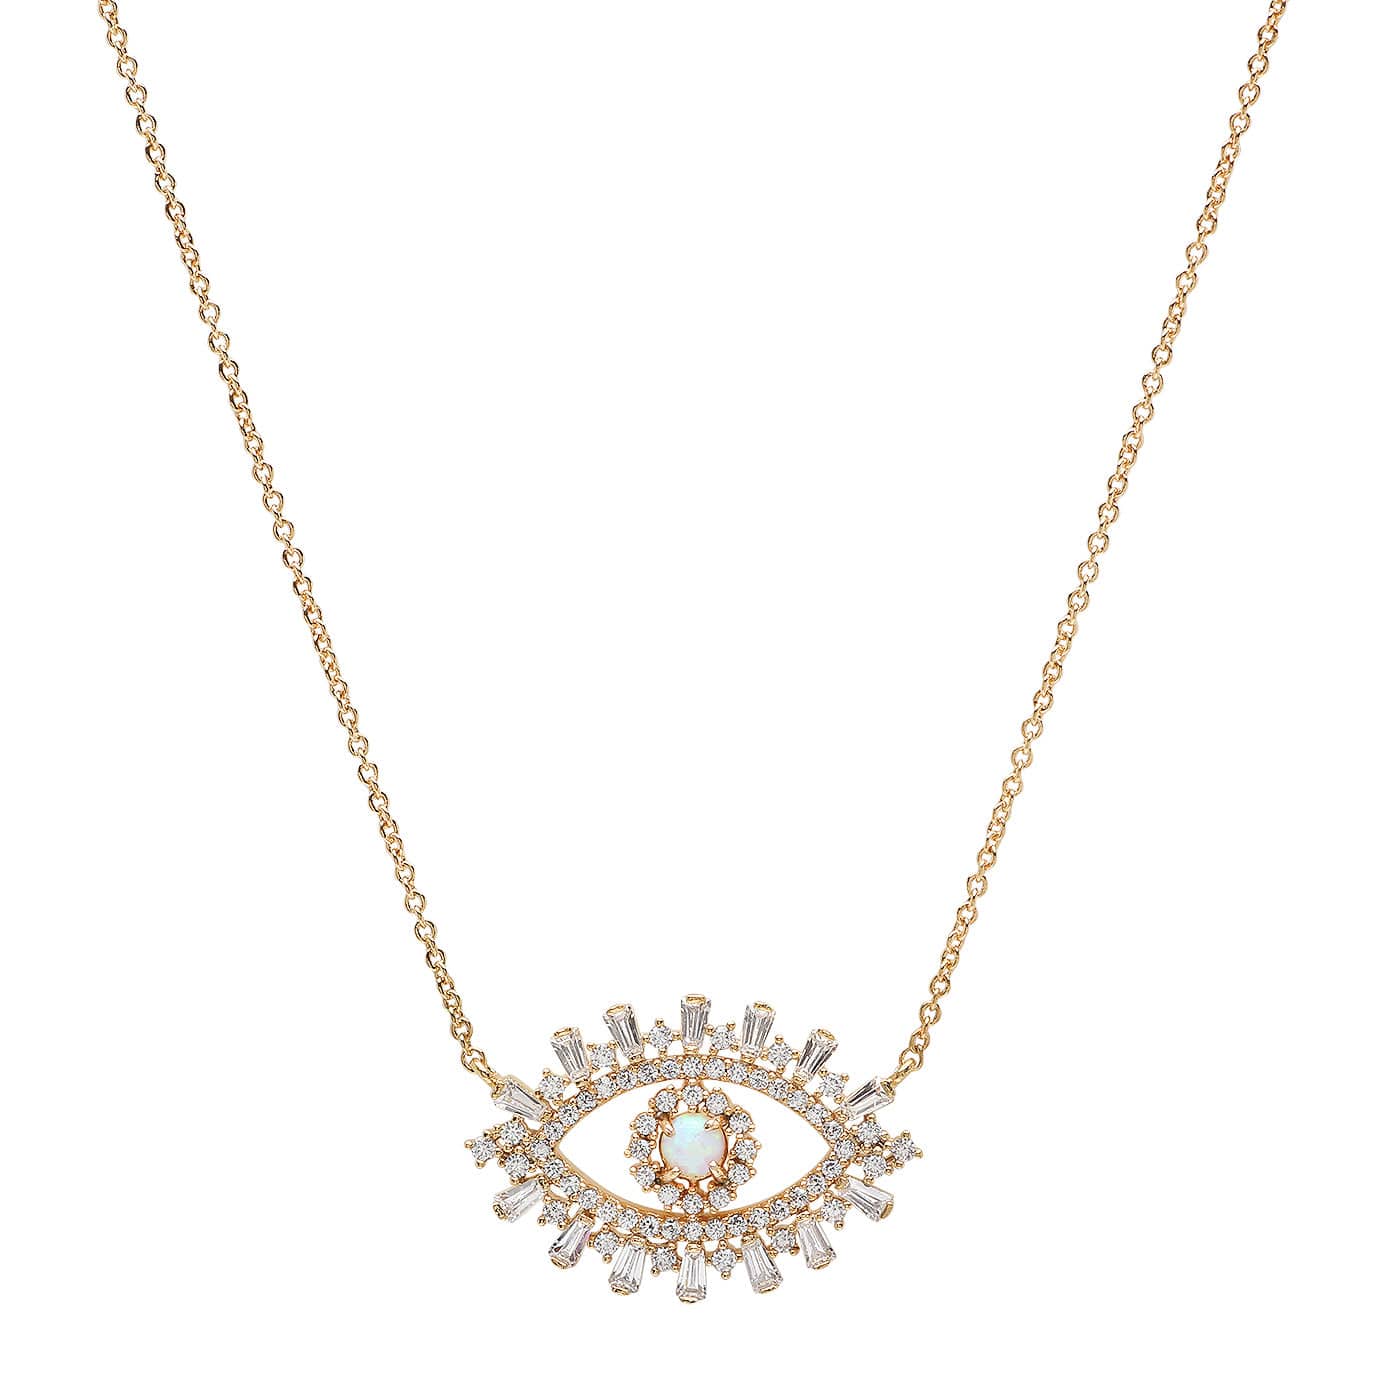 TAI JEWELRY Necklace Evil Eye Necklace With Opal Center And Baguette CZ